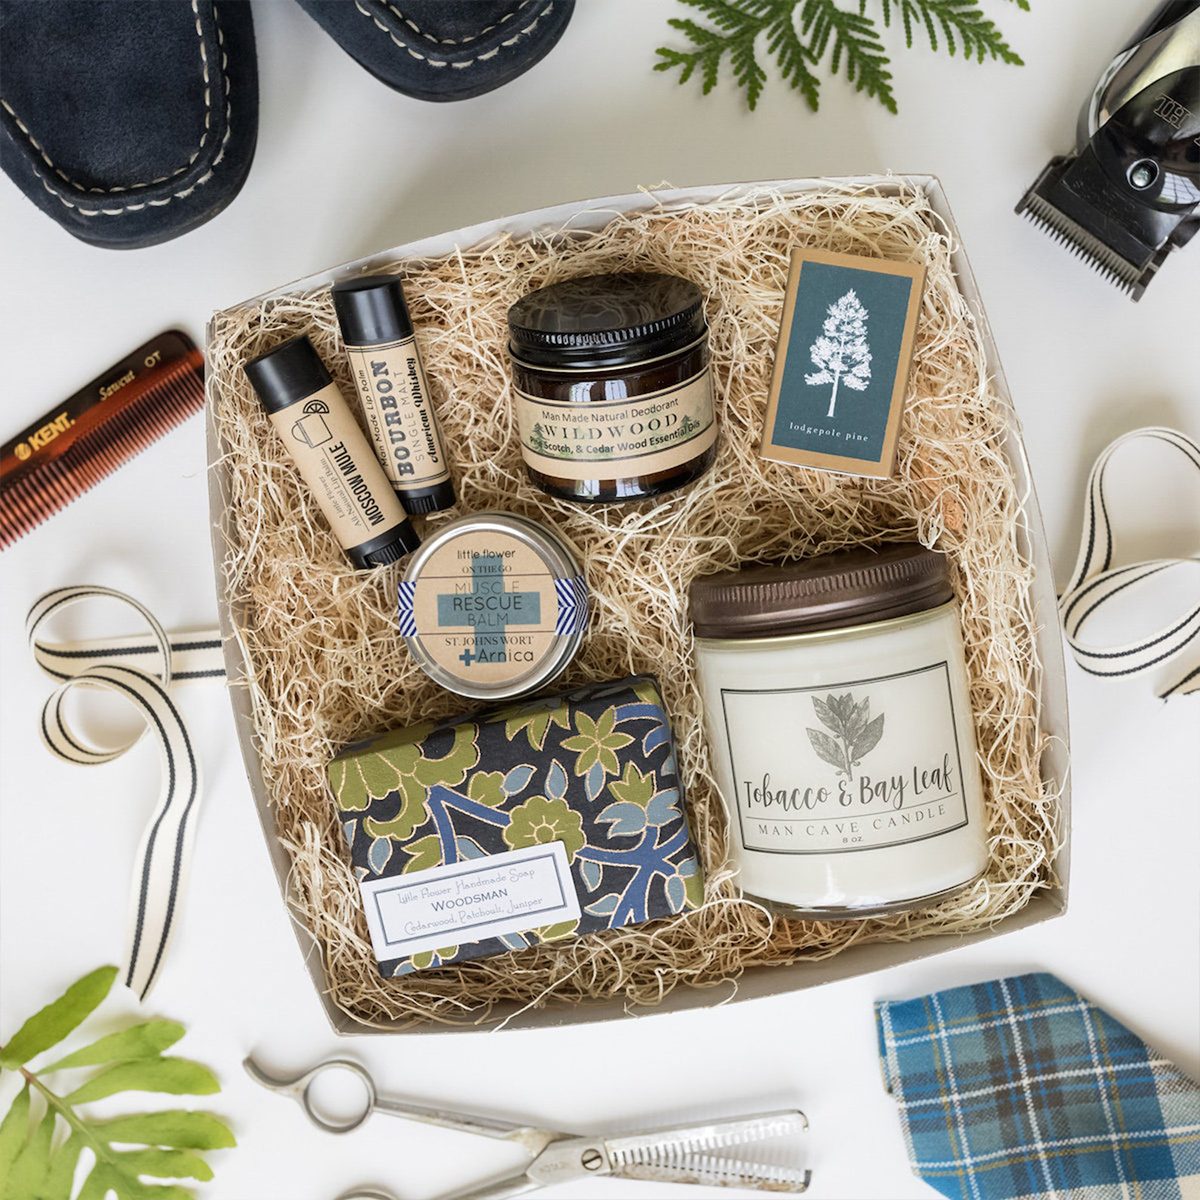 A Great Dad!, Gift Basket for Dad - Gift Baskets for Delivery